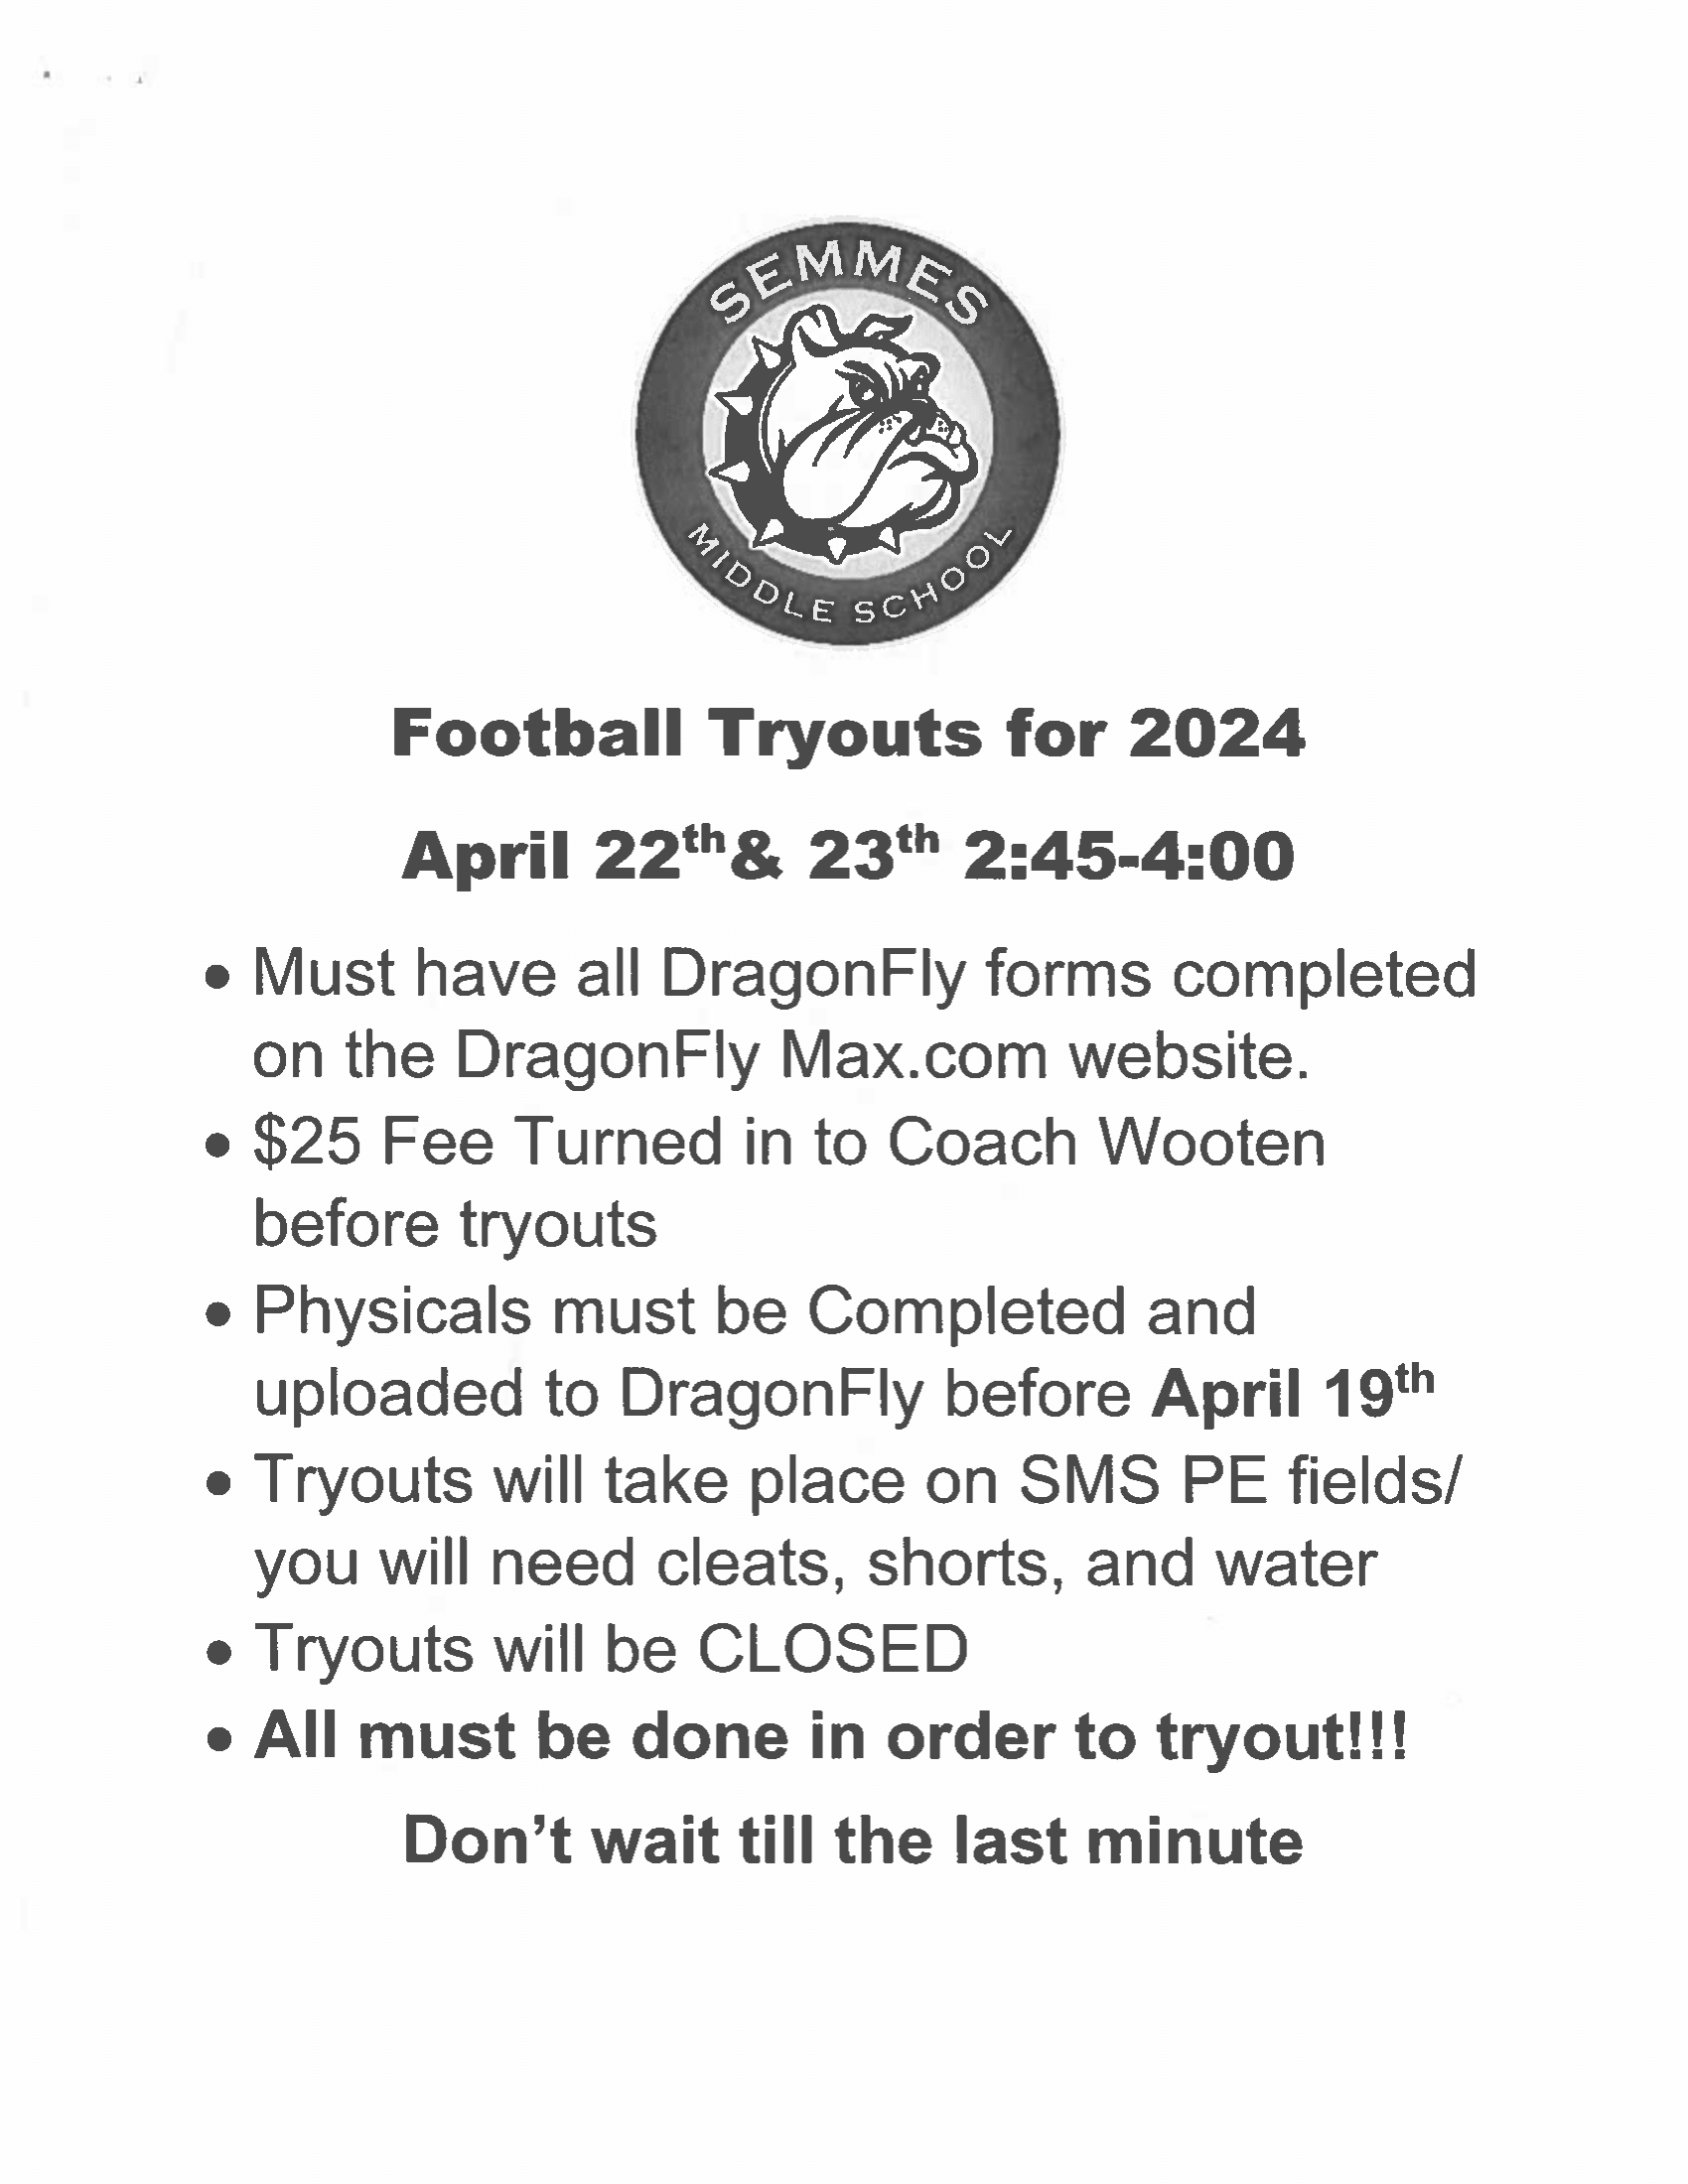 Football tryout flyer